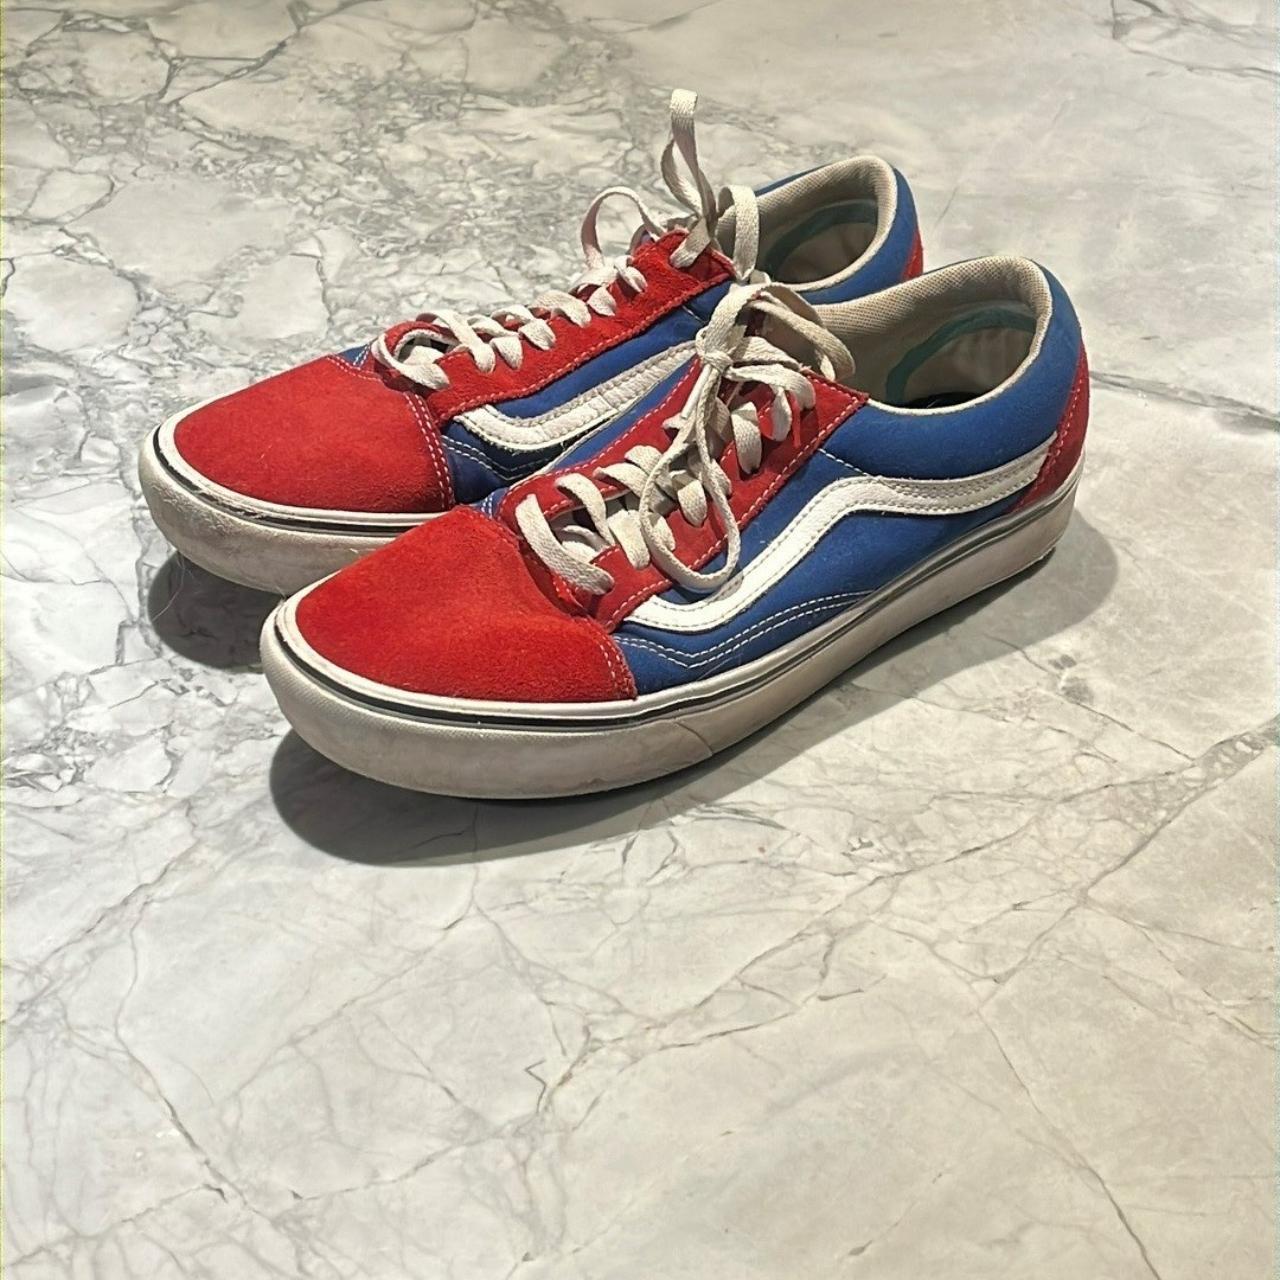 Red and Blue Vans, Good Condition - Depop